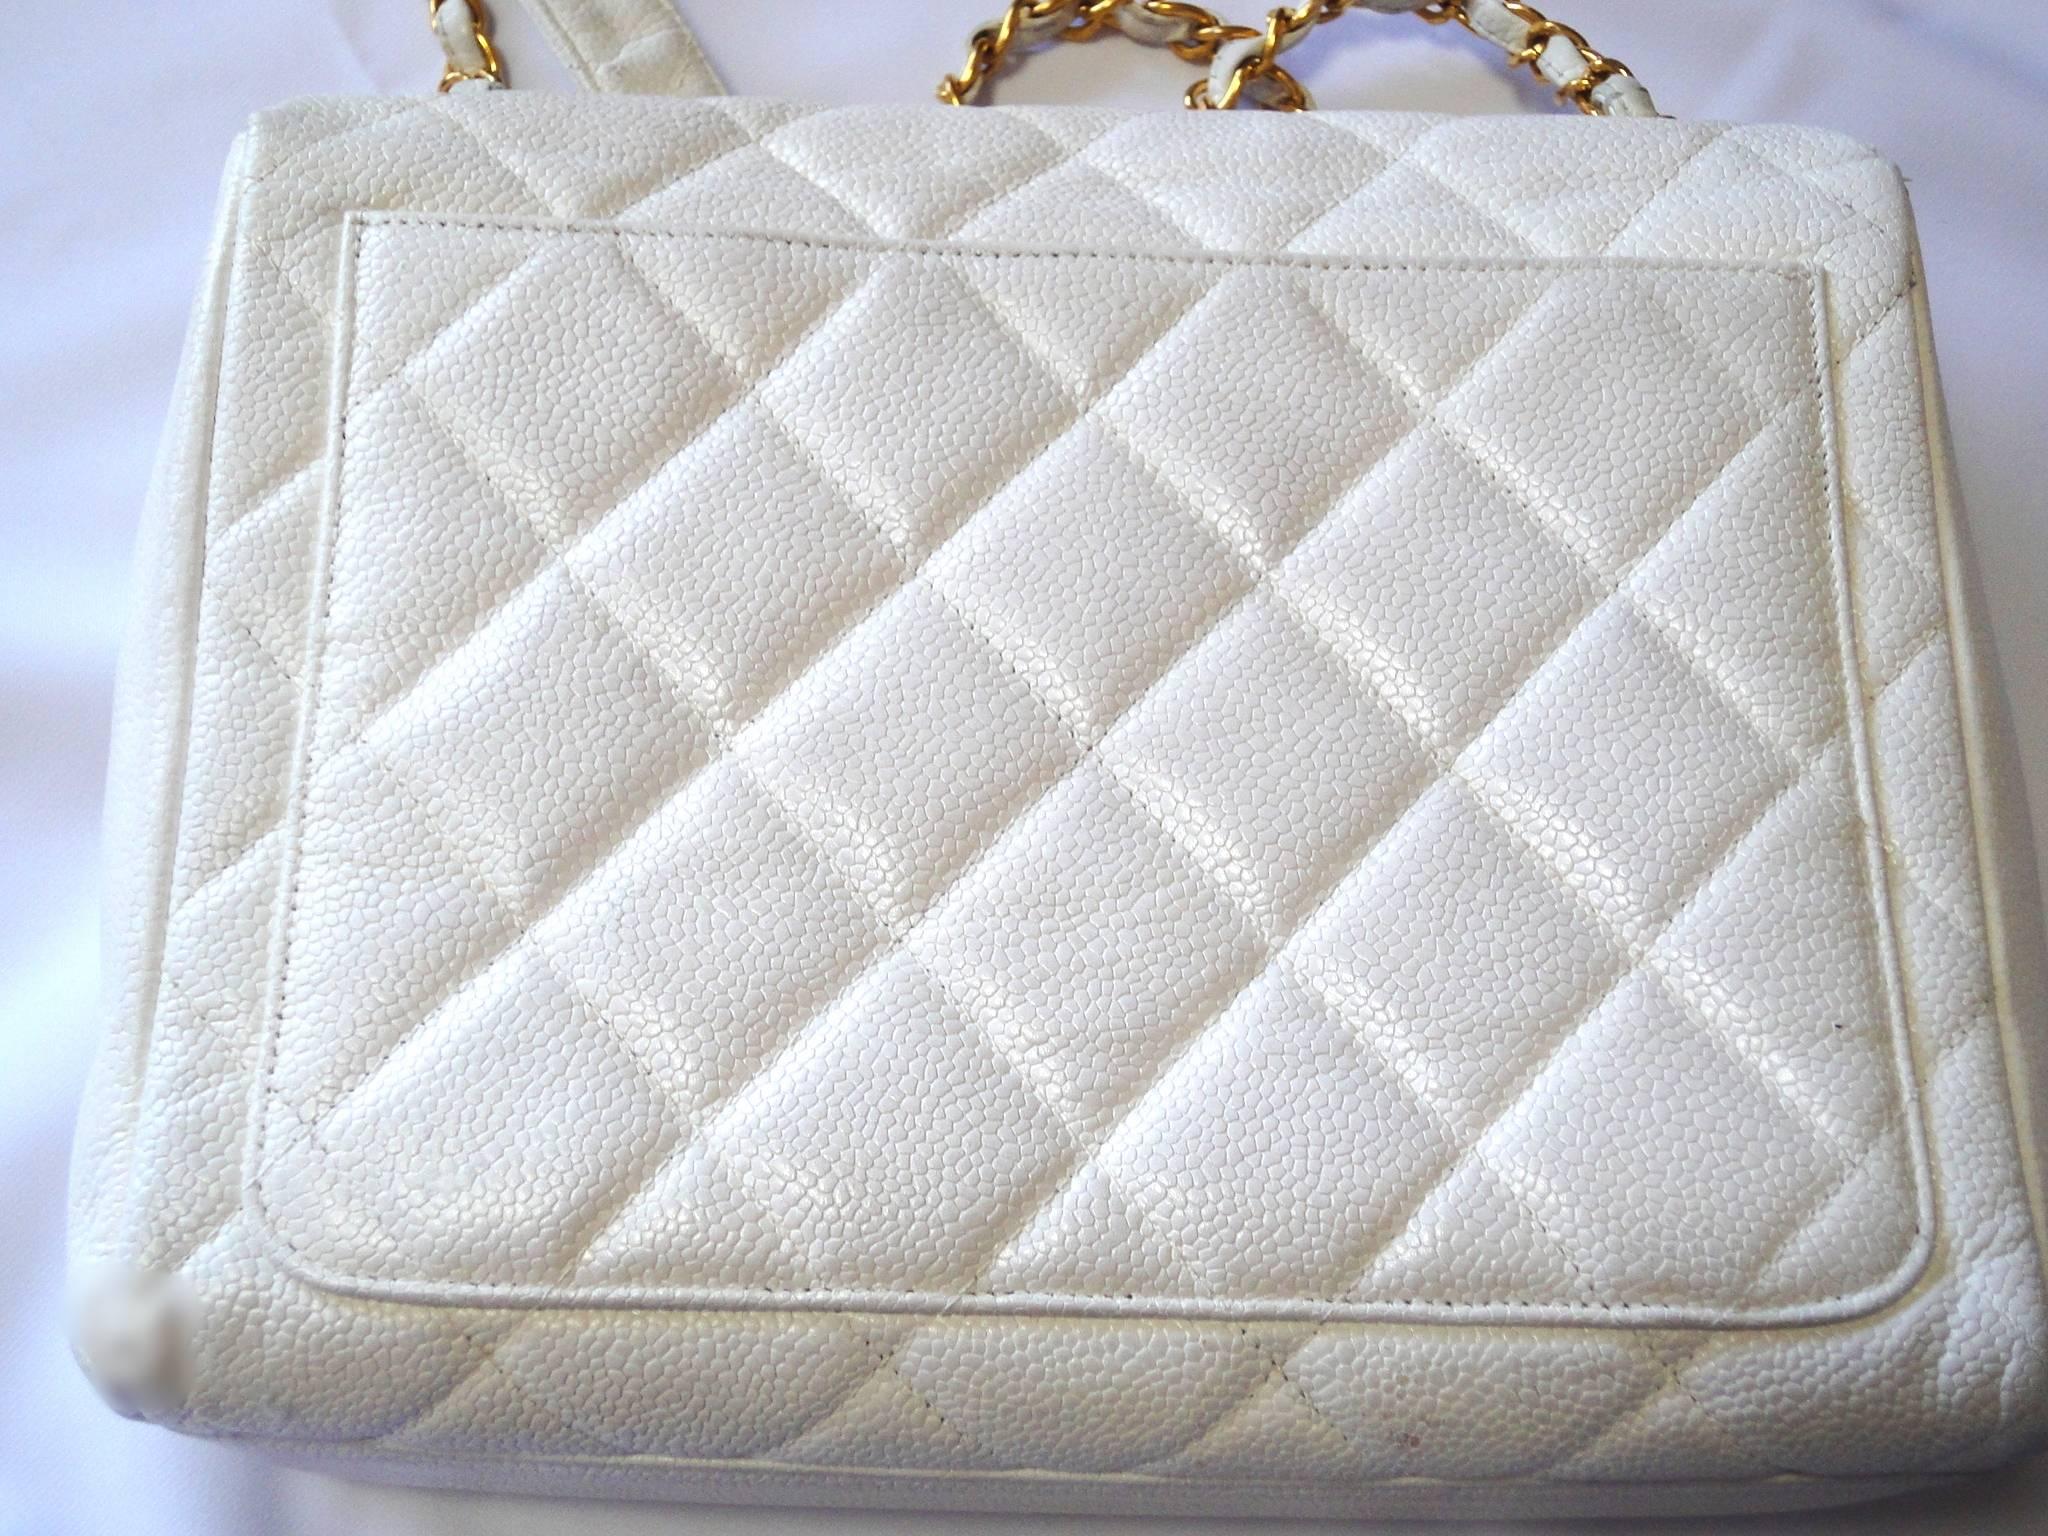 Vintage Chanel classic 2.55 white caviar leather square shape chain shoulder bag with golden CC closure. Must have purse.

Introducing a vintage Chanel classic white caviar skin square shape purse.

One of the most popular bags from the